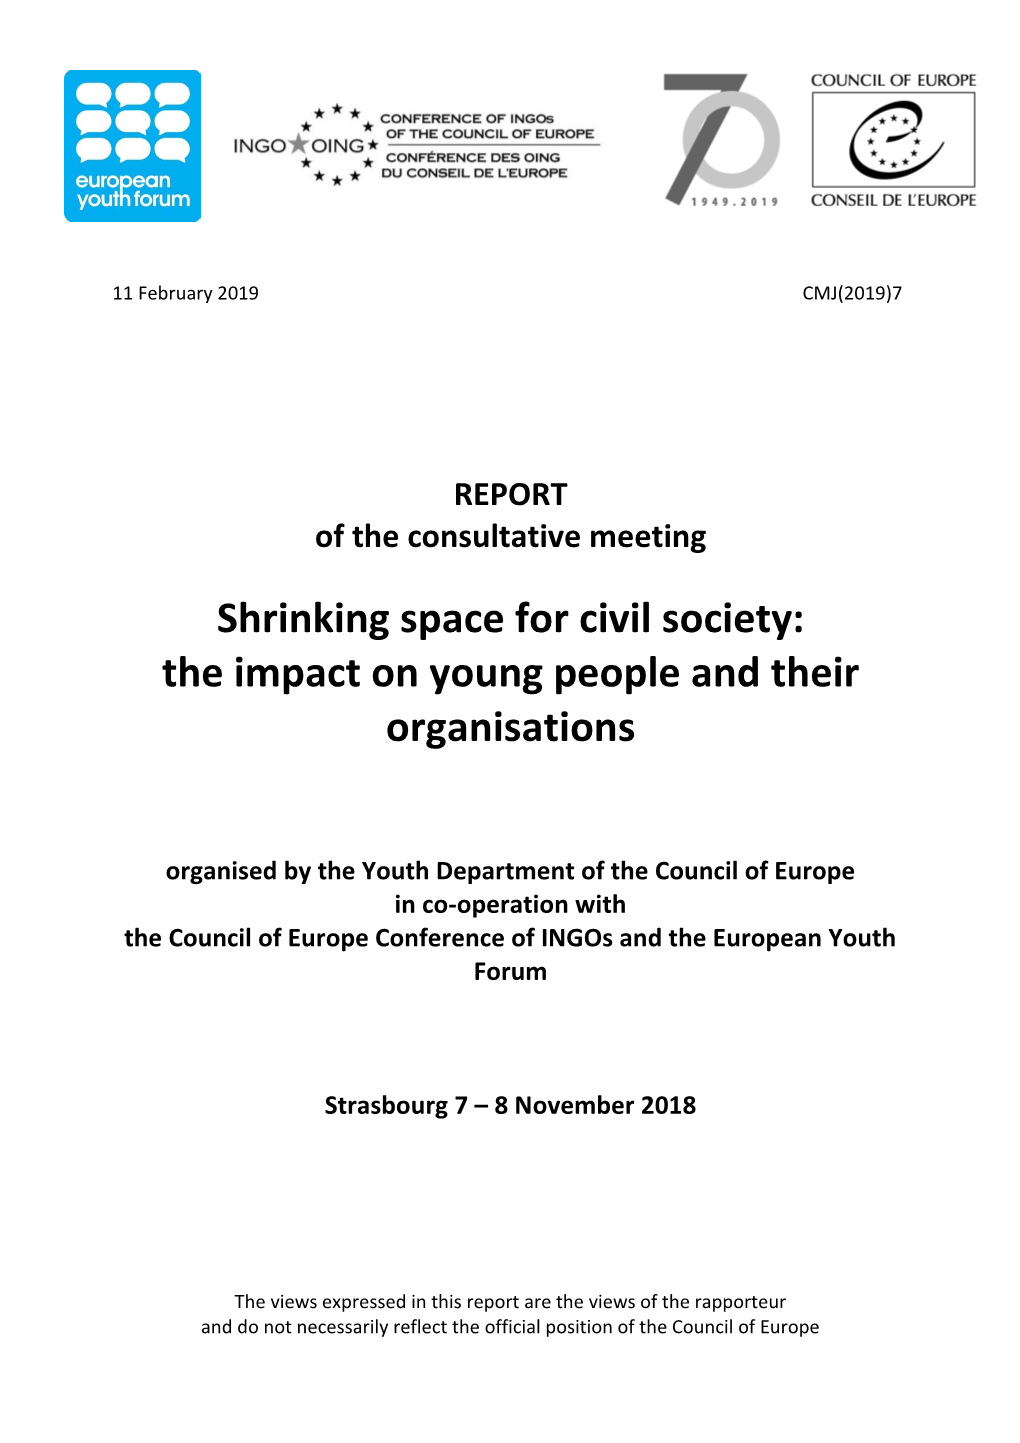 Shrinking Space for Civil Society: the Impact on Young People and Their Organisations